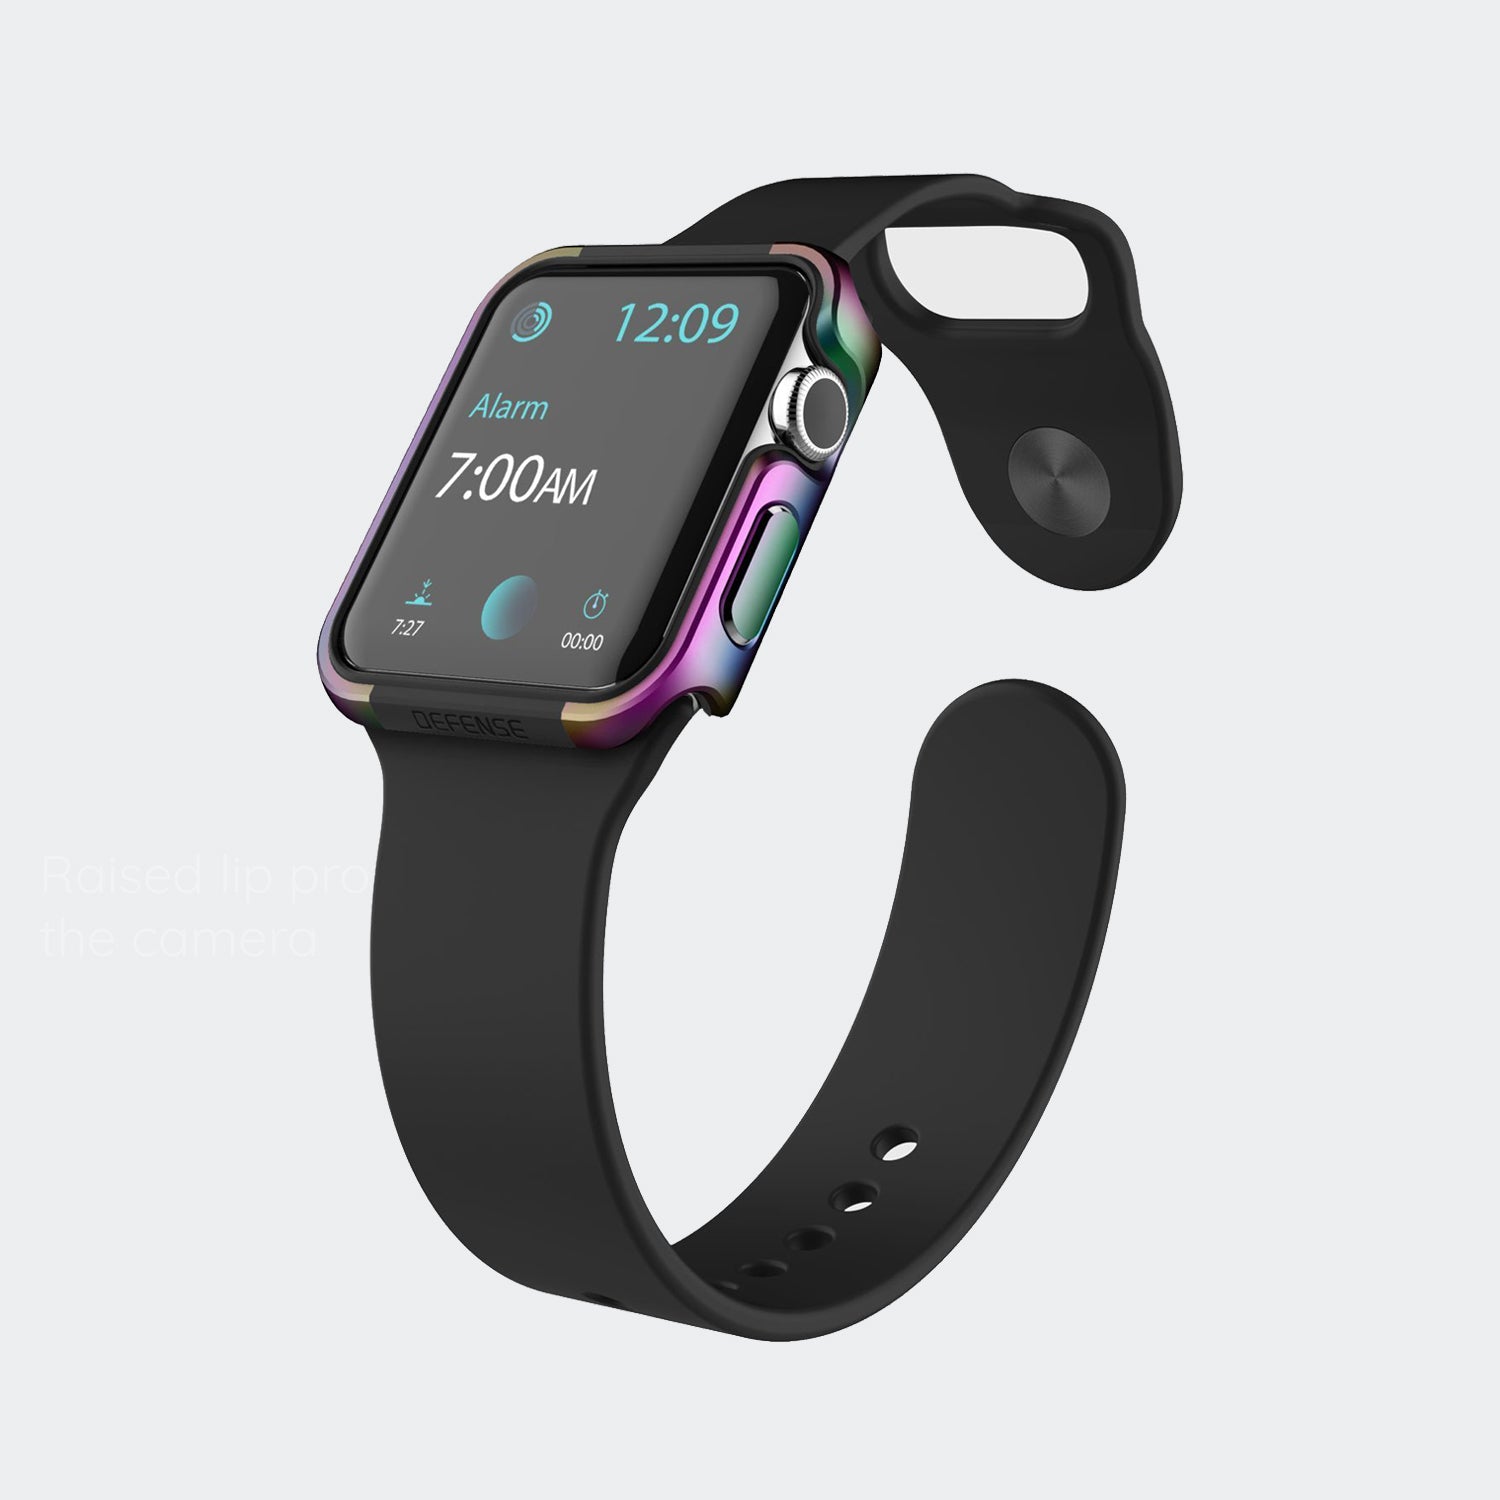 A Raptic Apple Watch 44mm Case - EDGE with a rainbow-colored band and a premium machined anodized aluminum bumper that protects it.